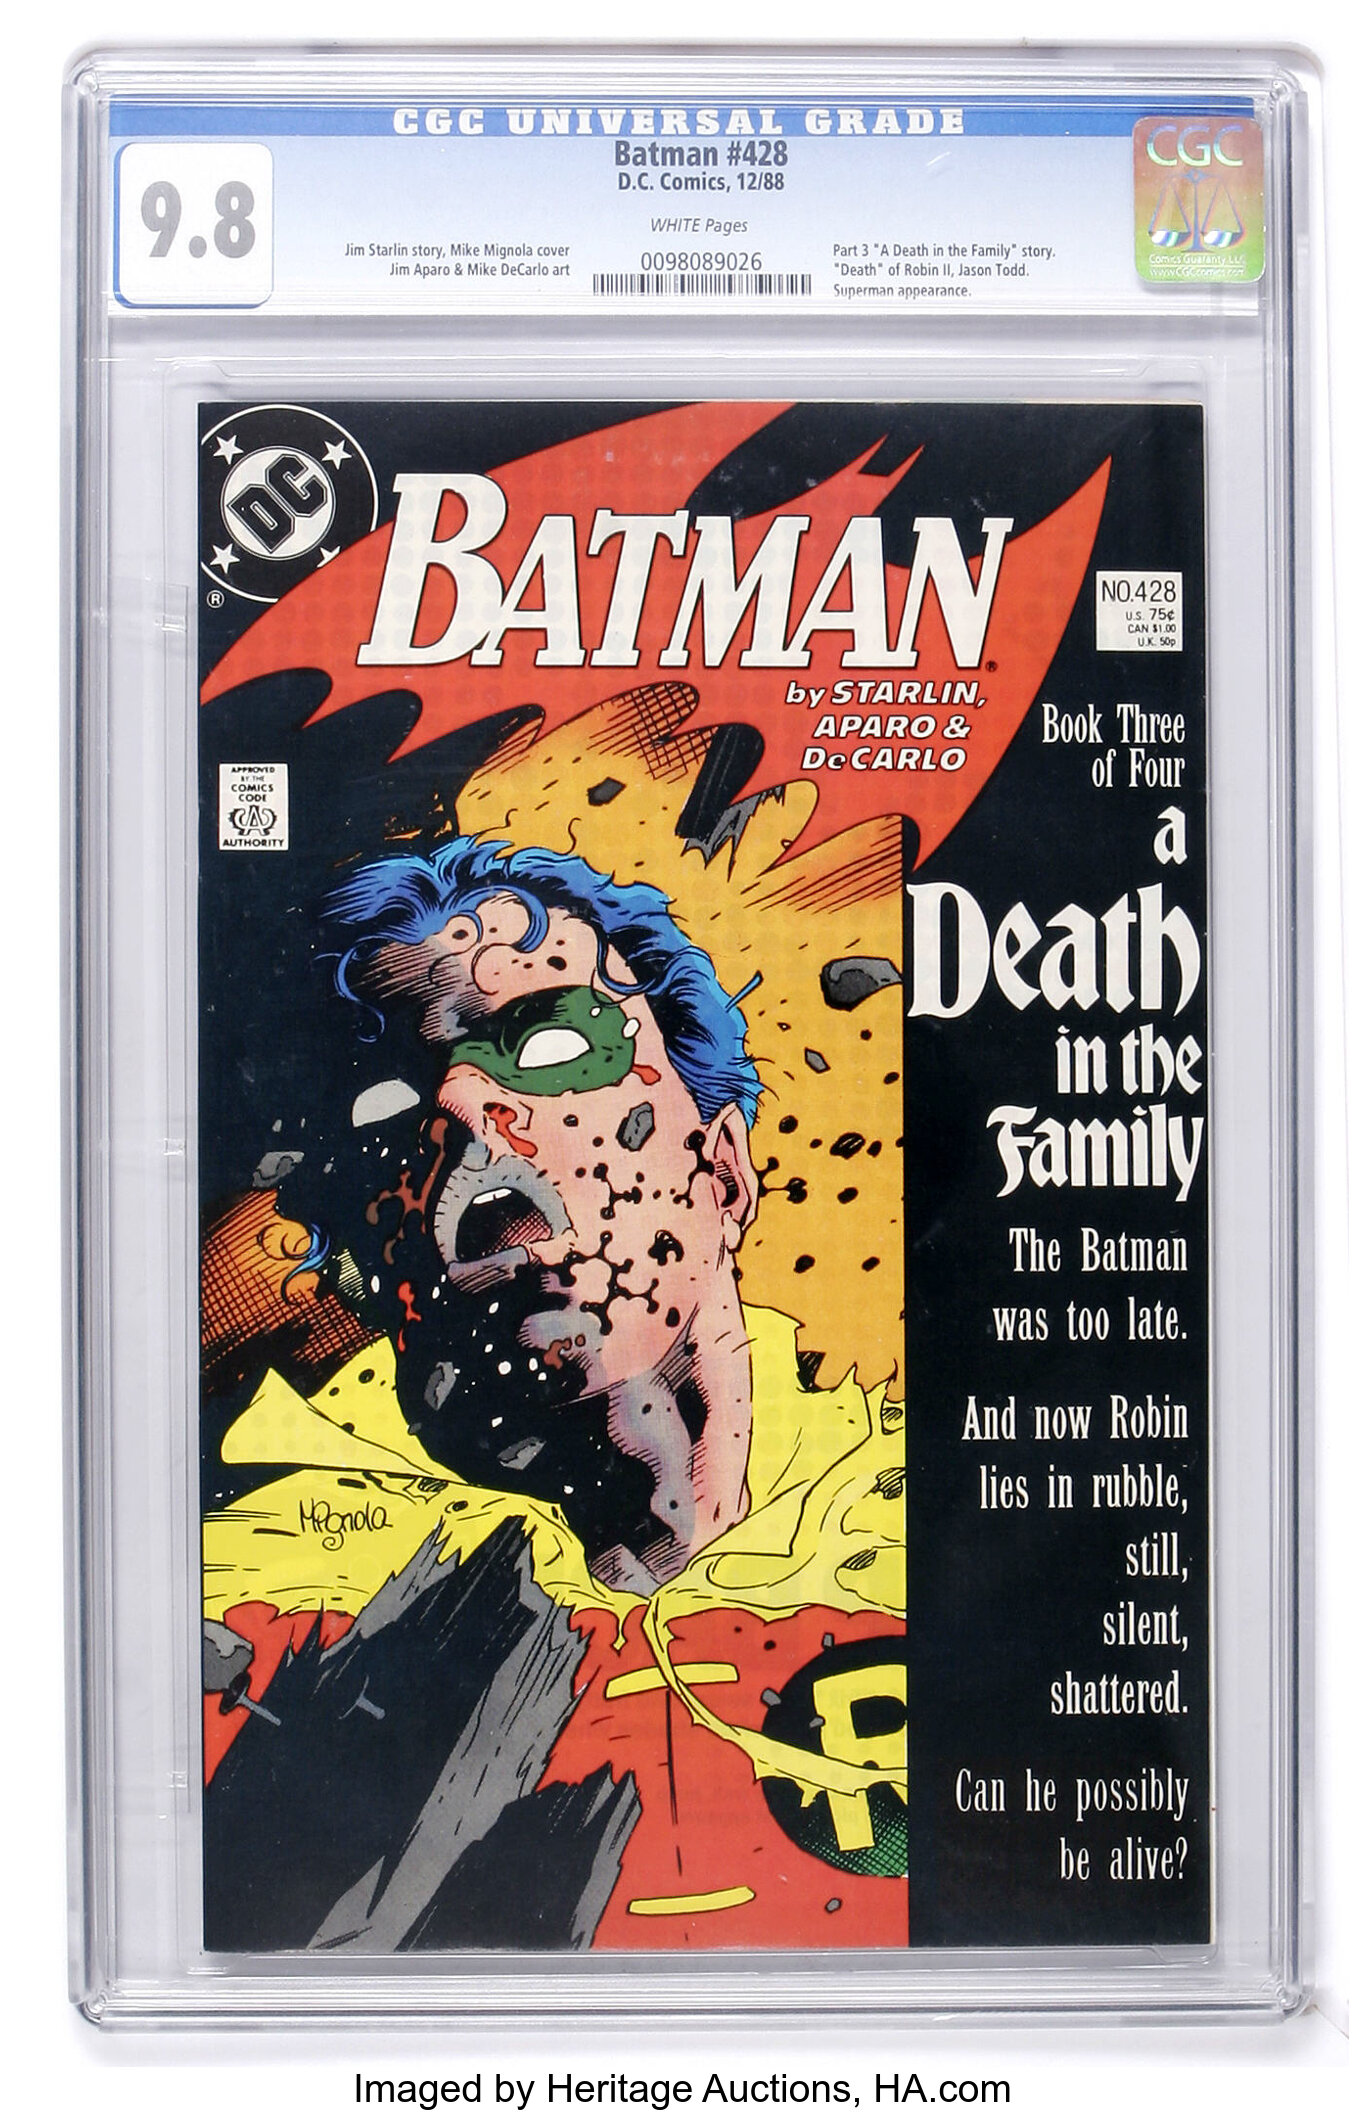 How Much Is Batman #428 Worth? Browse Comic Prices | Heritage Auctions